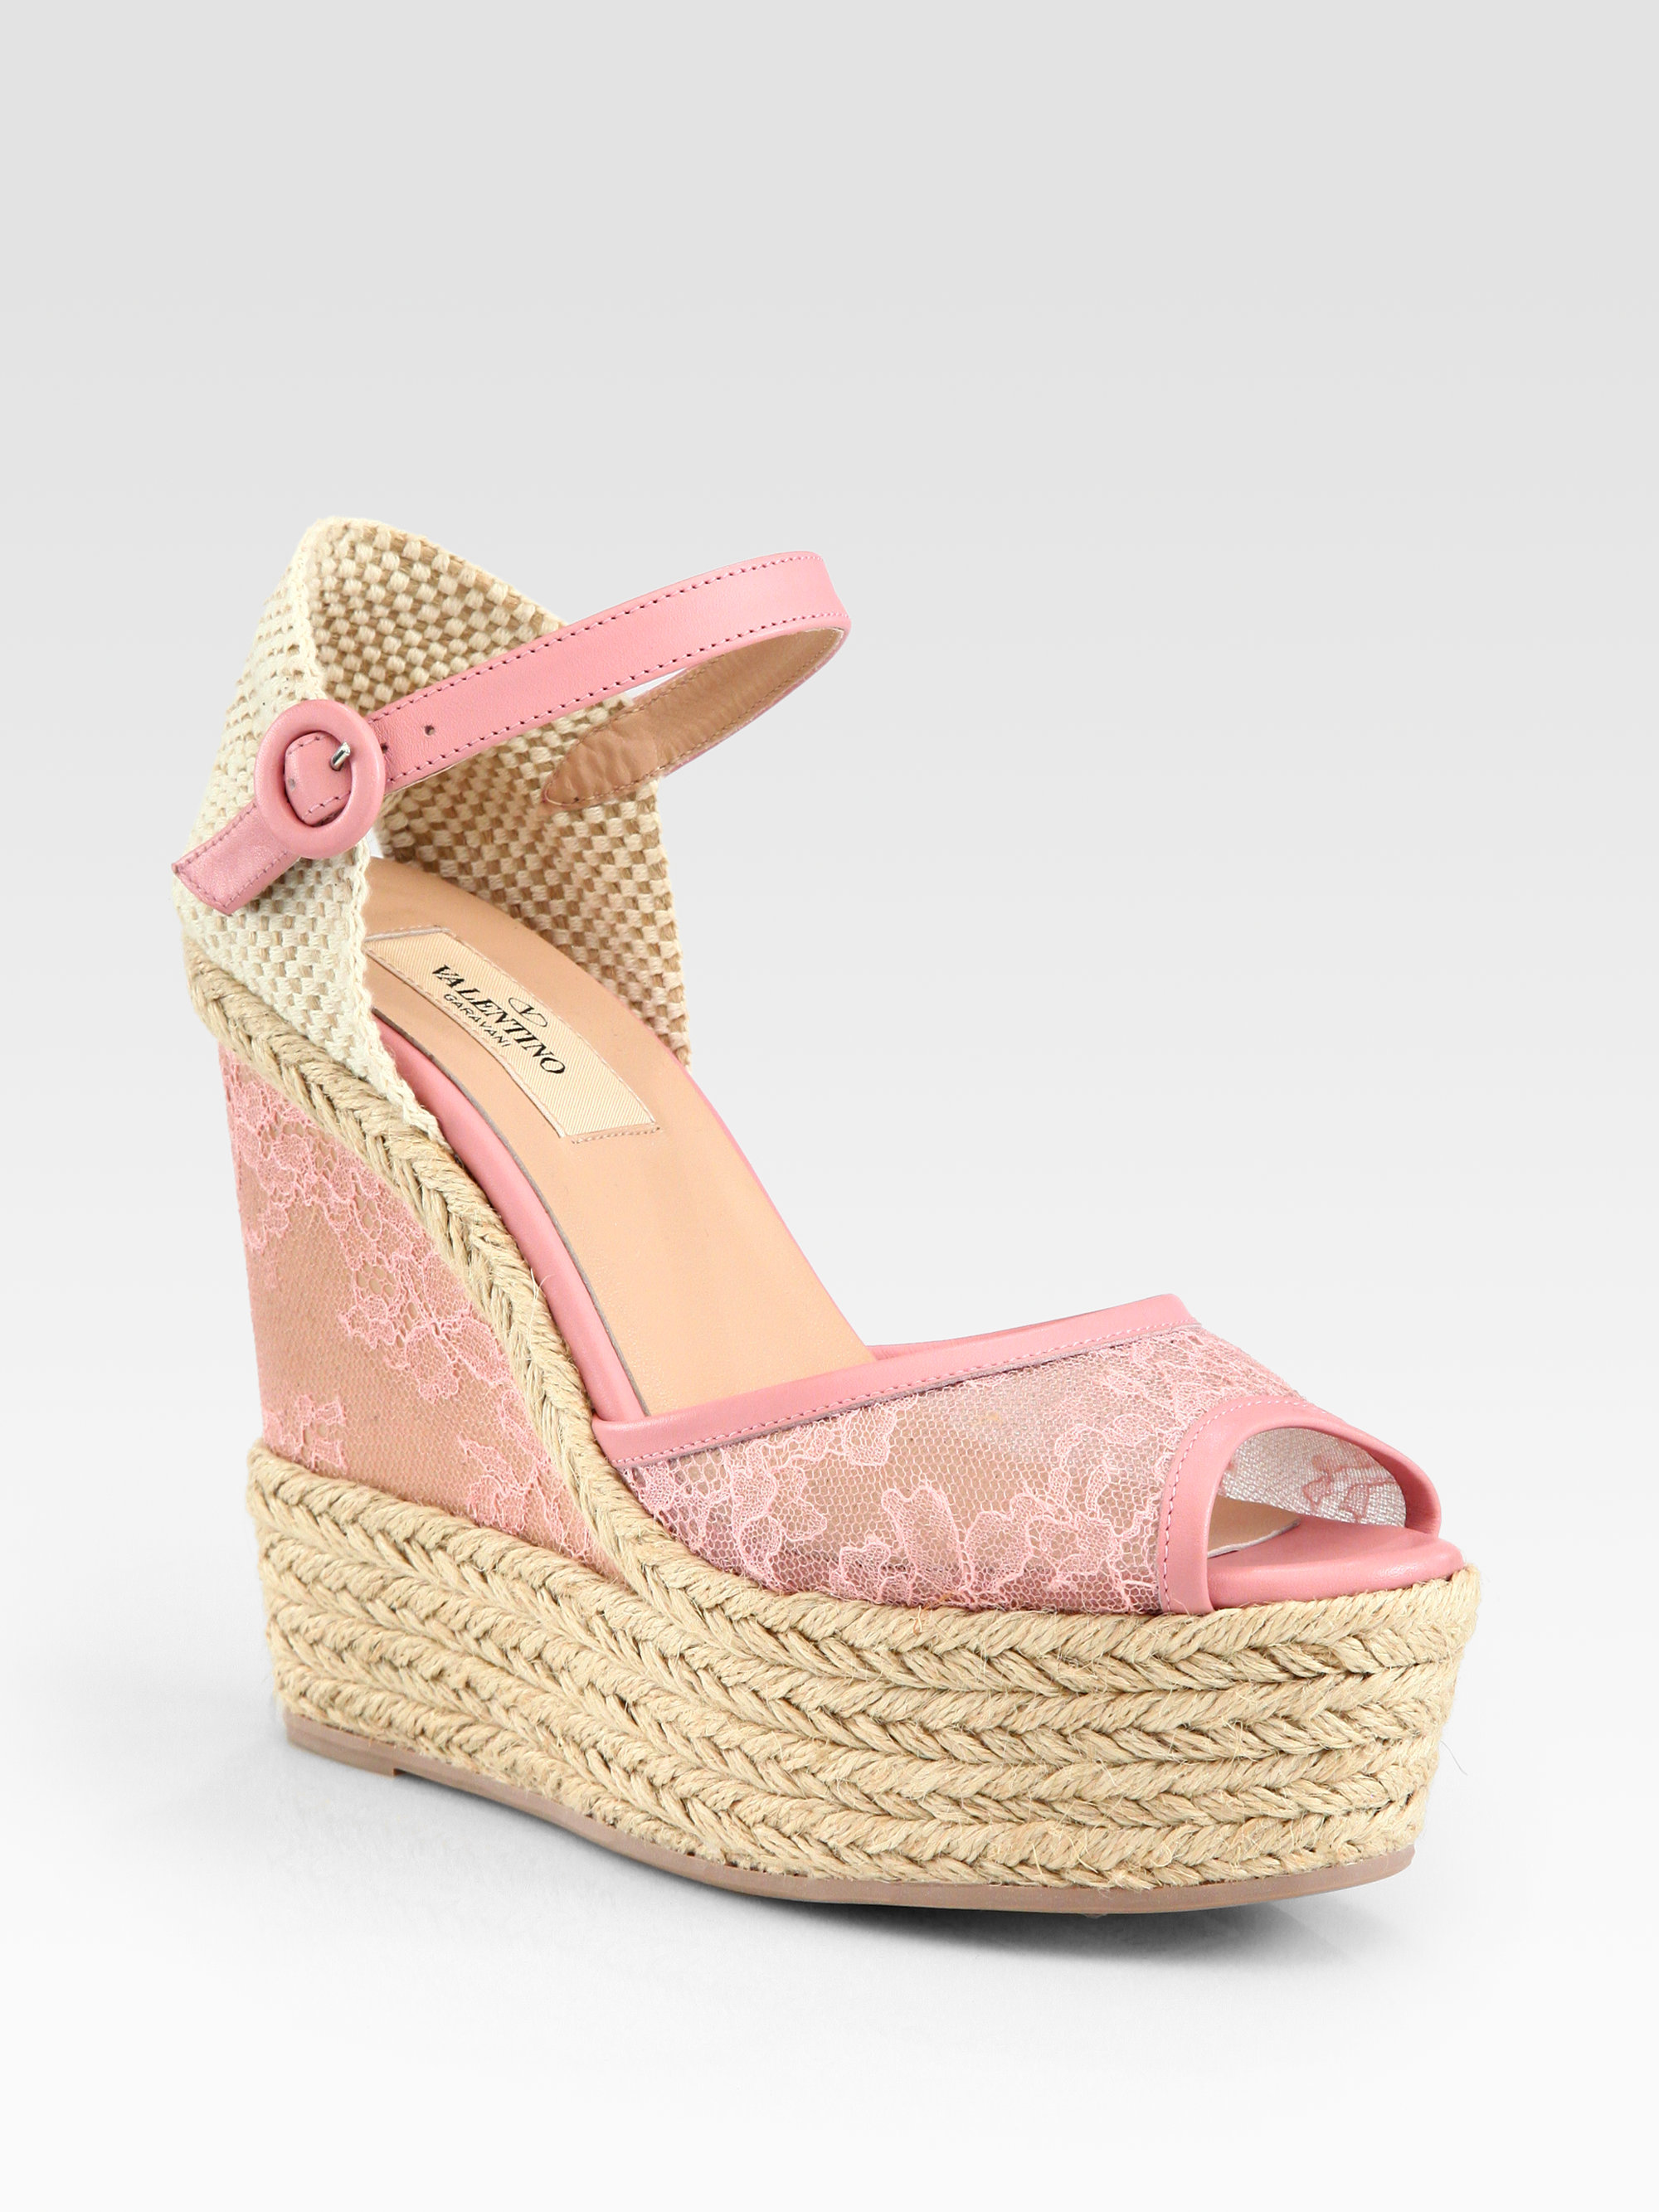 Lyst - Valentino Glamorous Lace Leather Espadrille Wedge Sandals in Pink